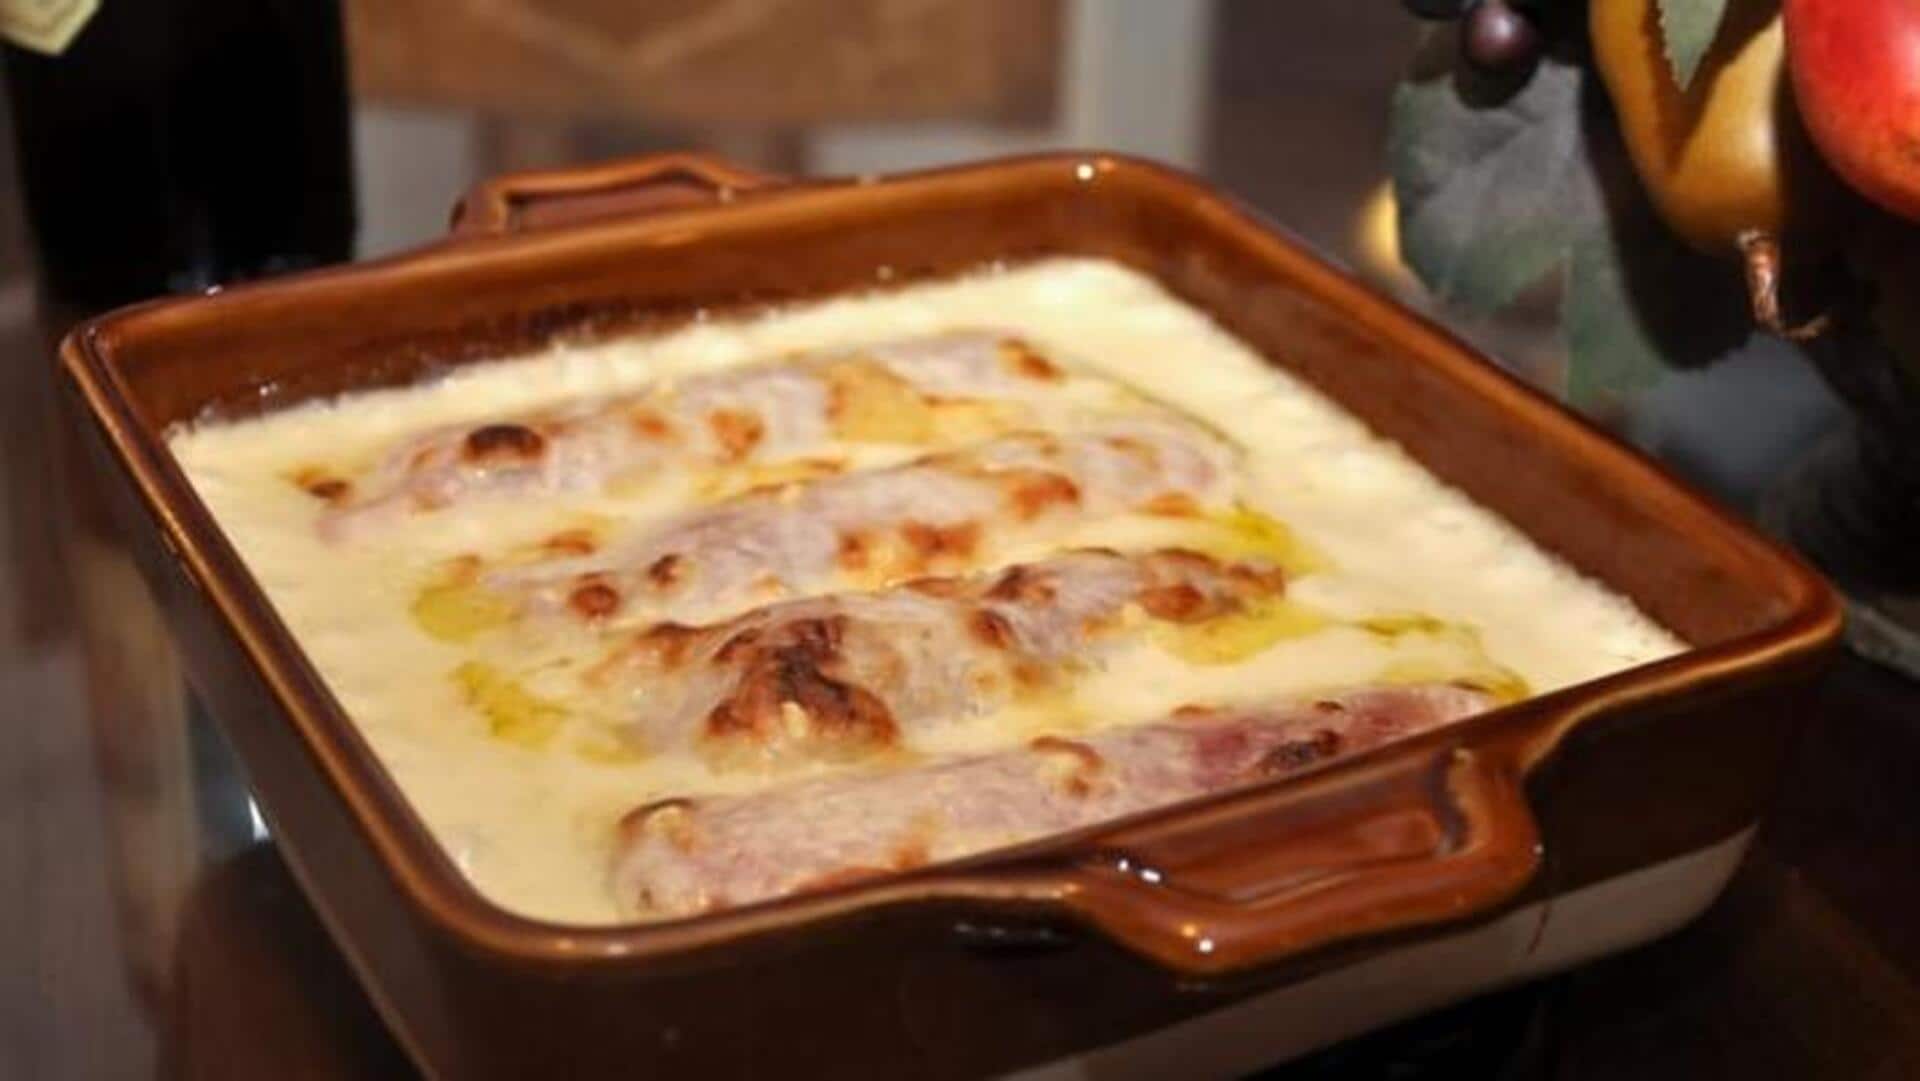 Impress your guests with this Belgian endive gratin recipe